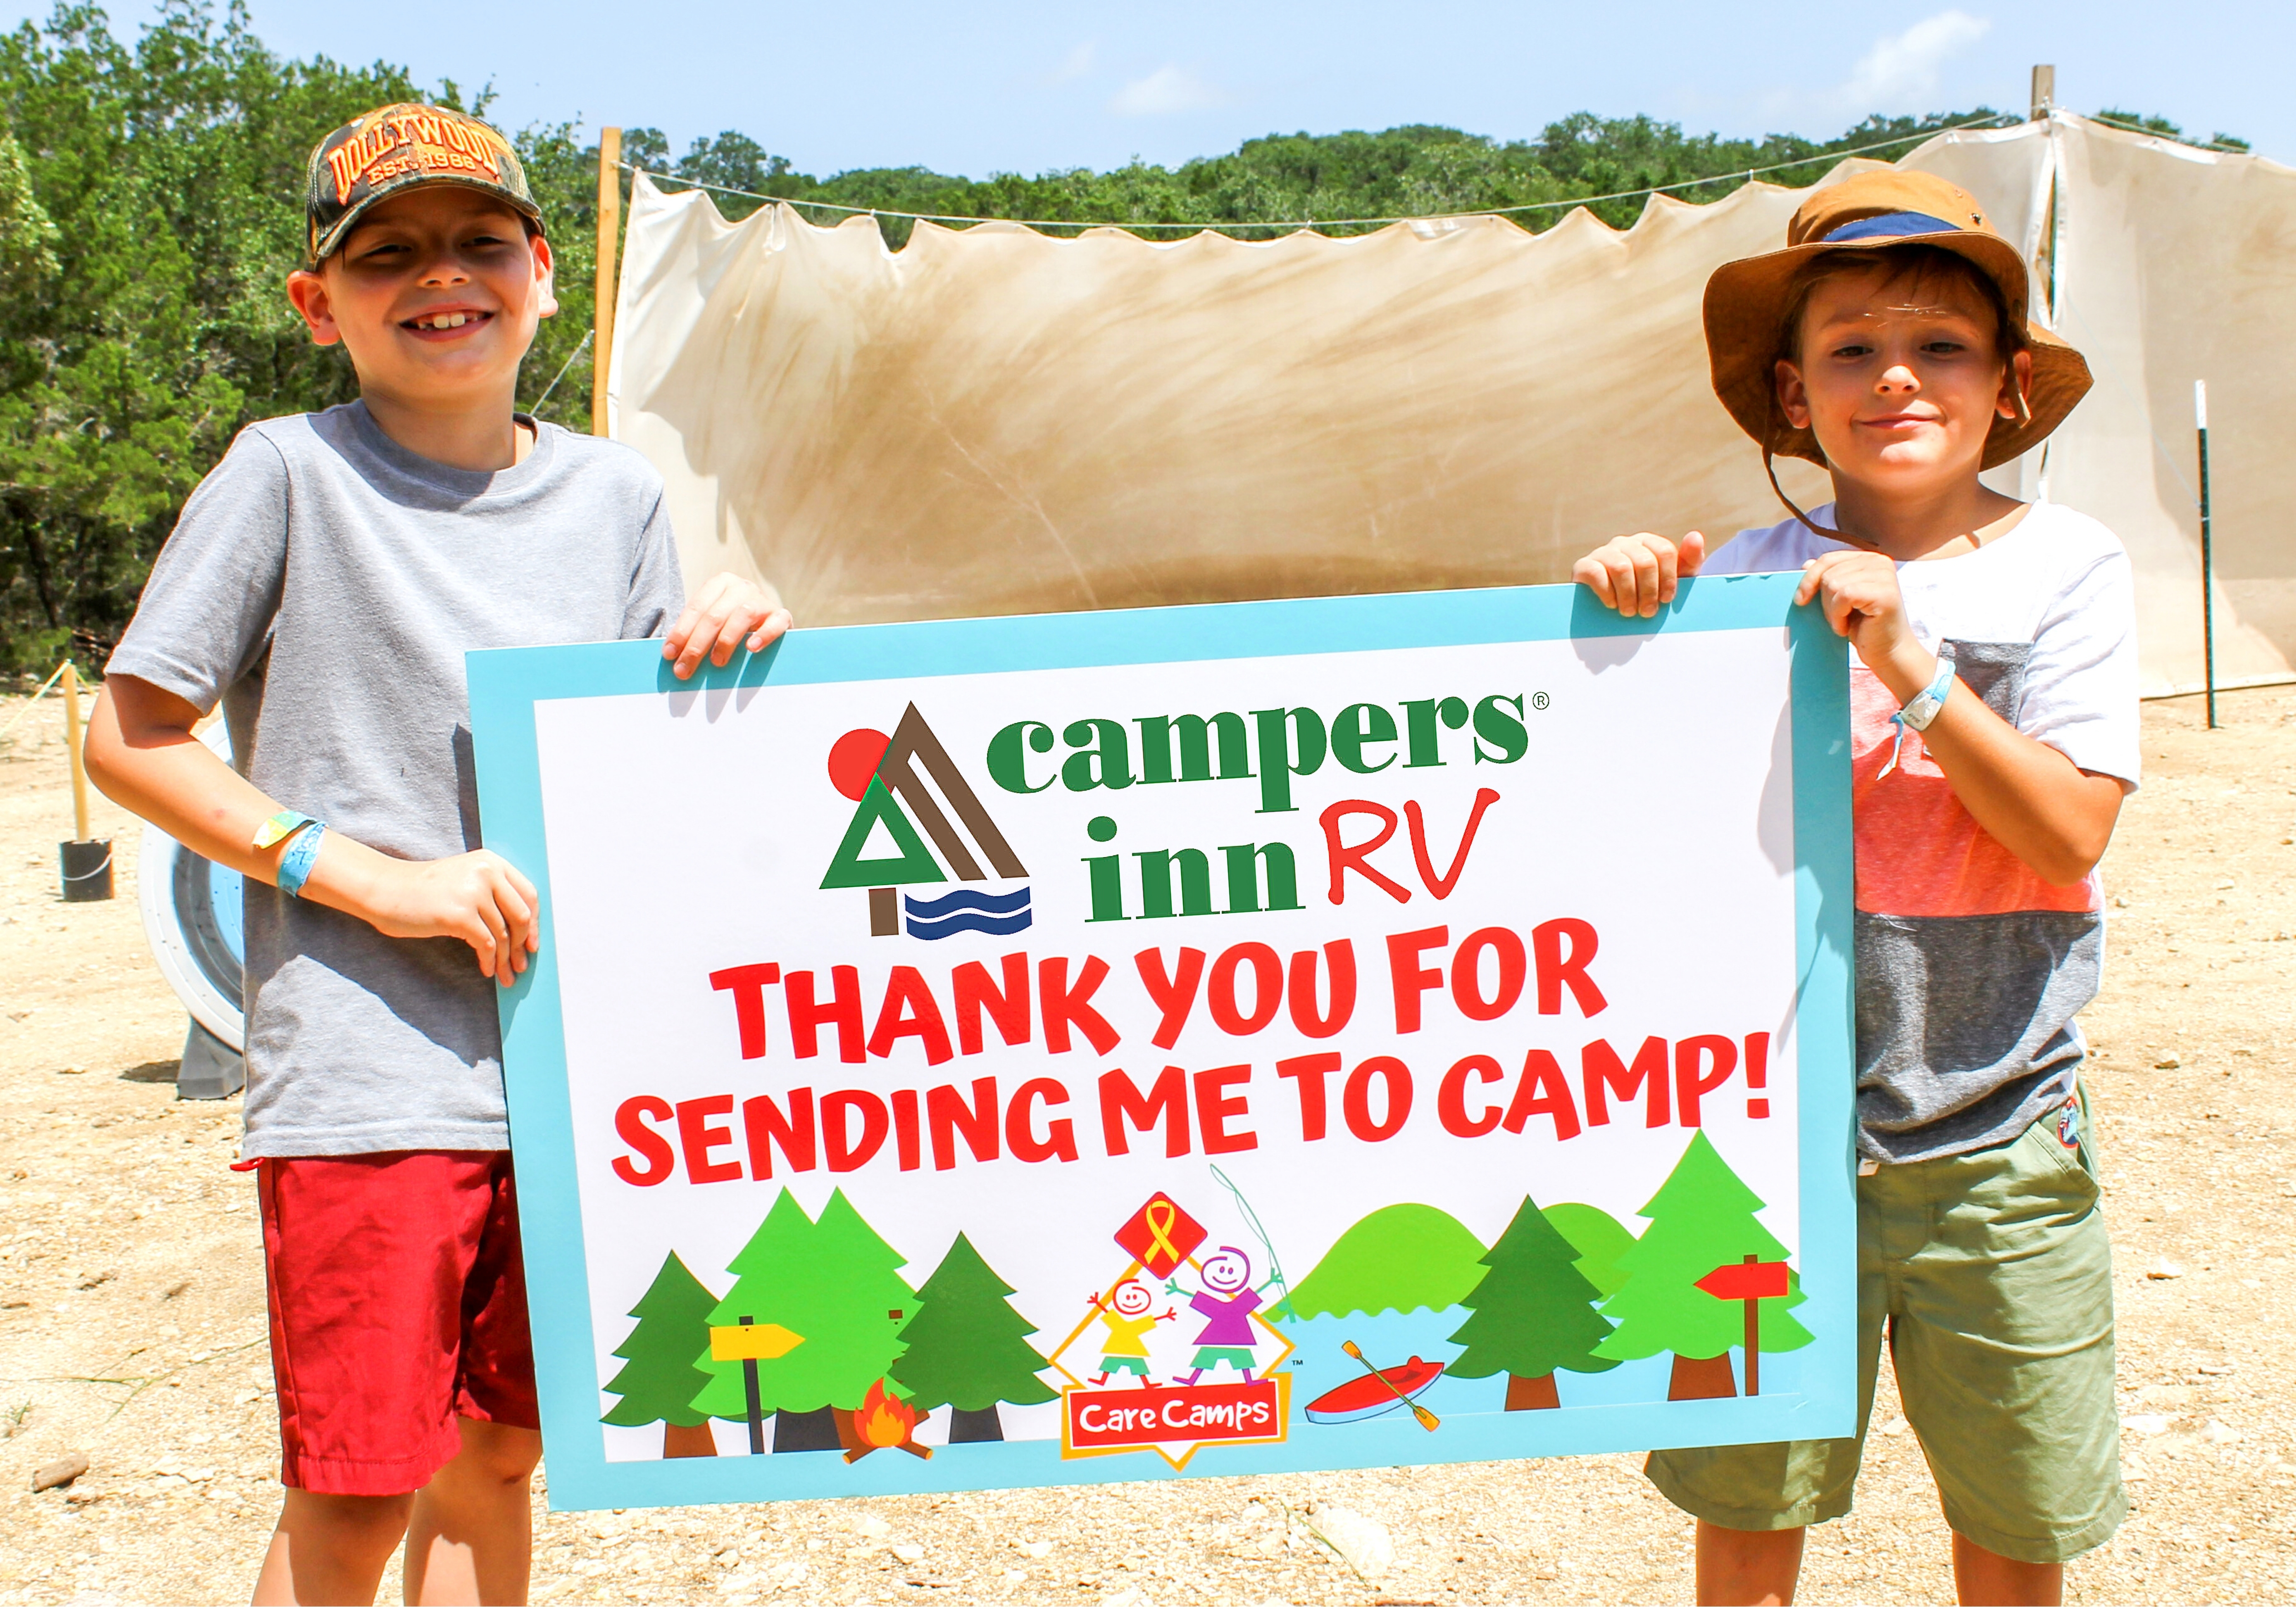 Campers Inn RV Donates over $700,000 to Care Camps